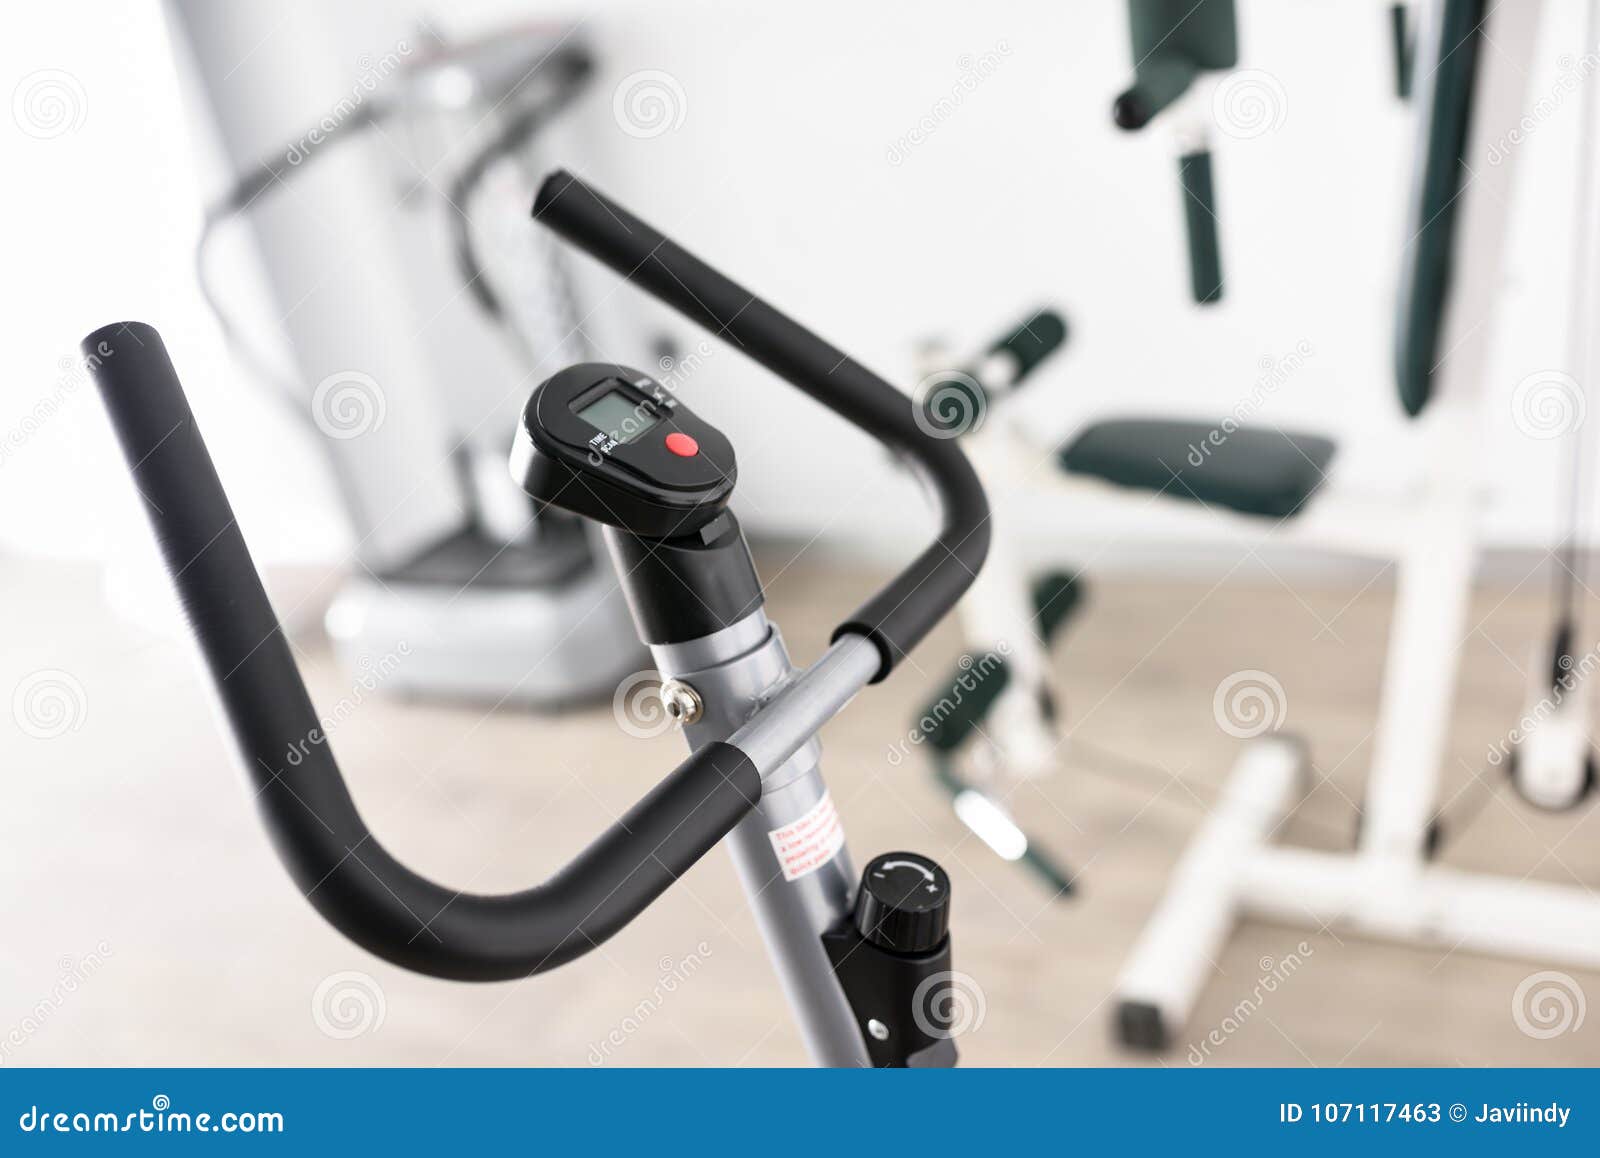 Physiotherapy equipment - Stock Image - C015/5208 - Science Photo